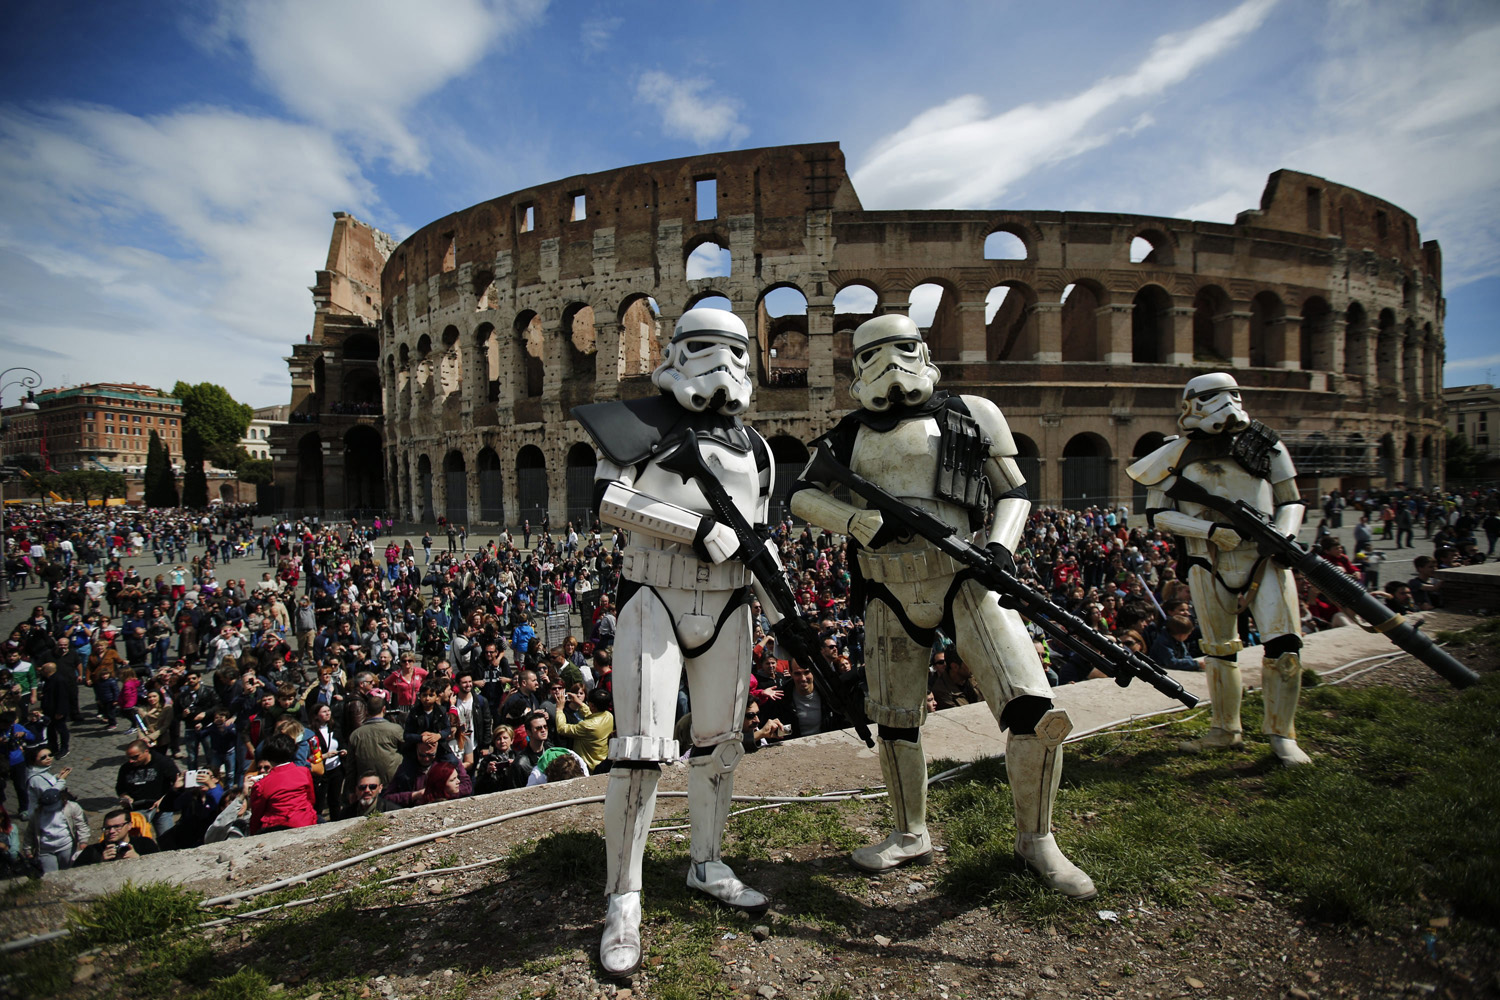 Members of the Star Wars fan club dressed as stormtroopers celebrate Star Wars Day in front of the Colosseum in central Rome on May 4, 2014.